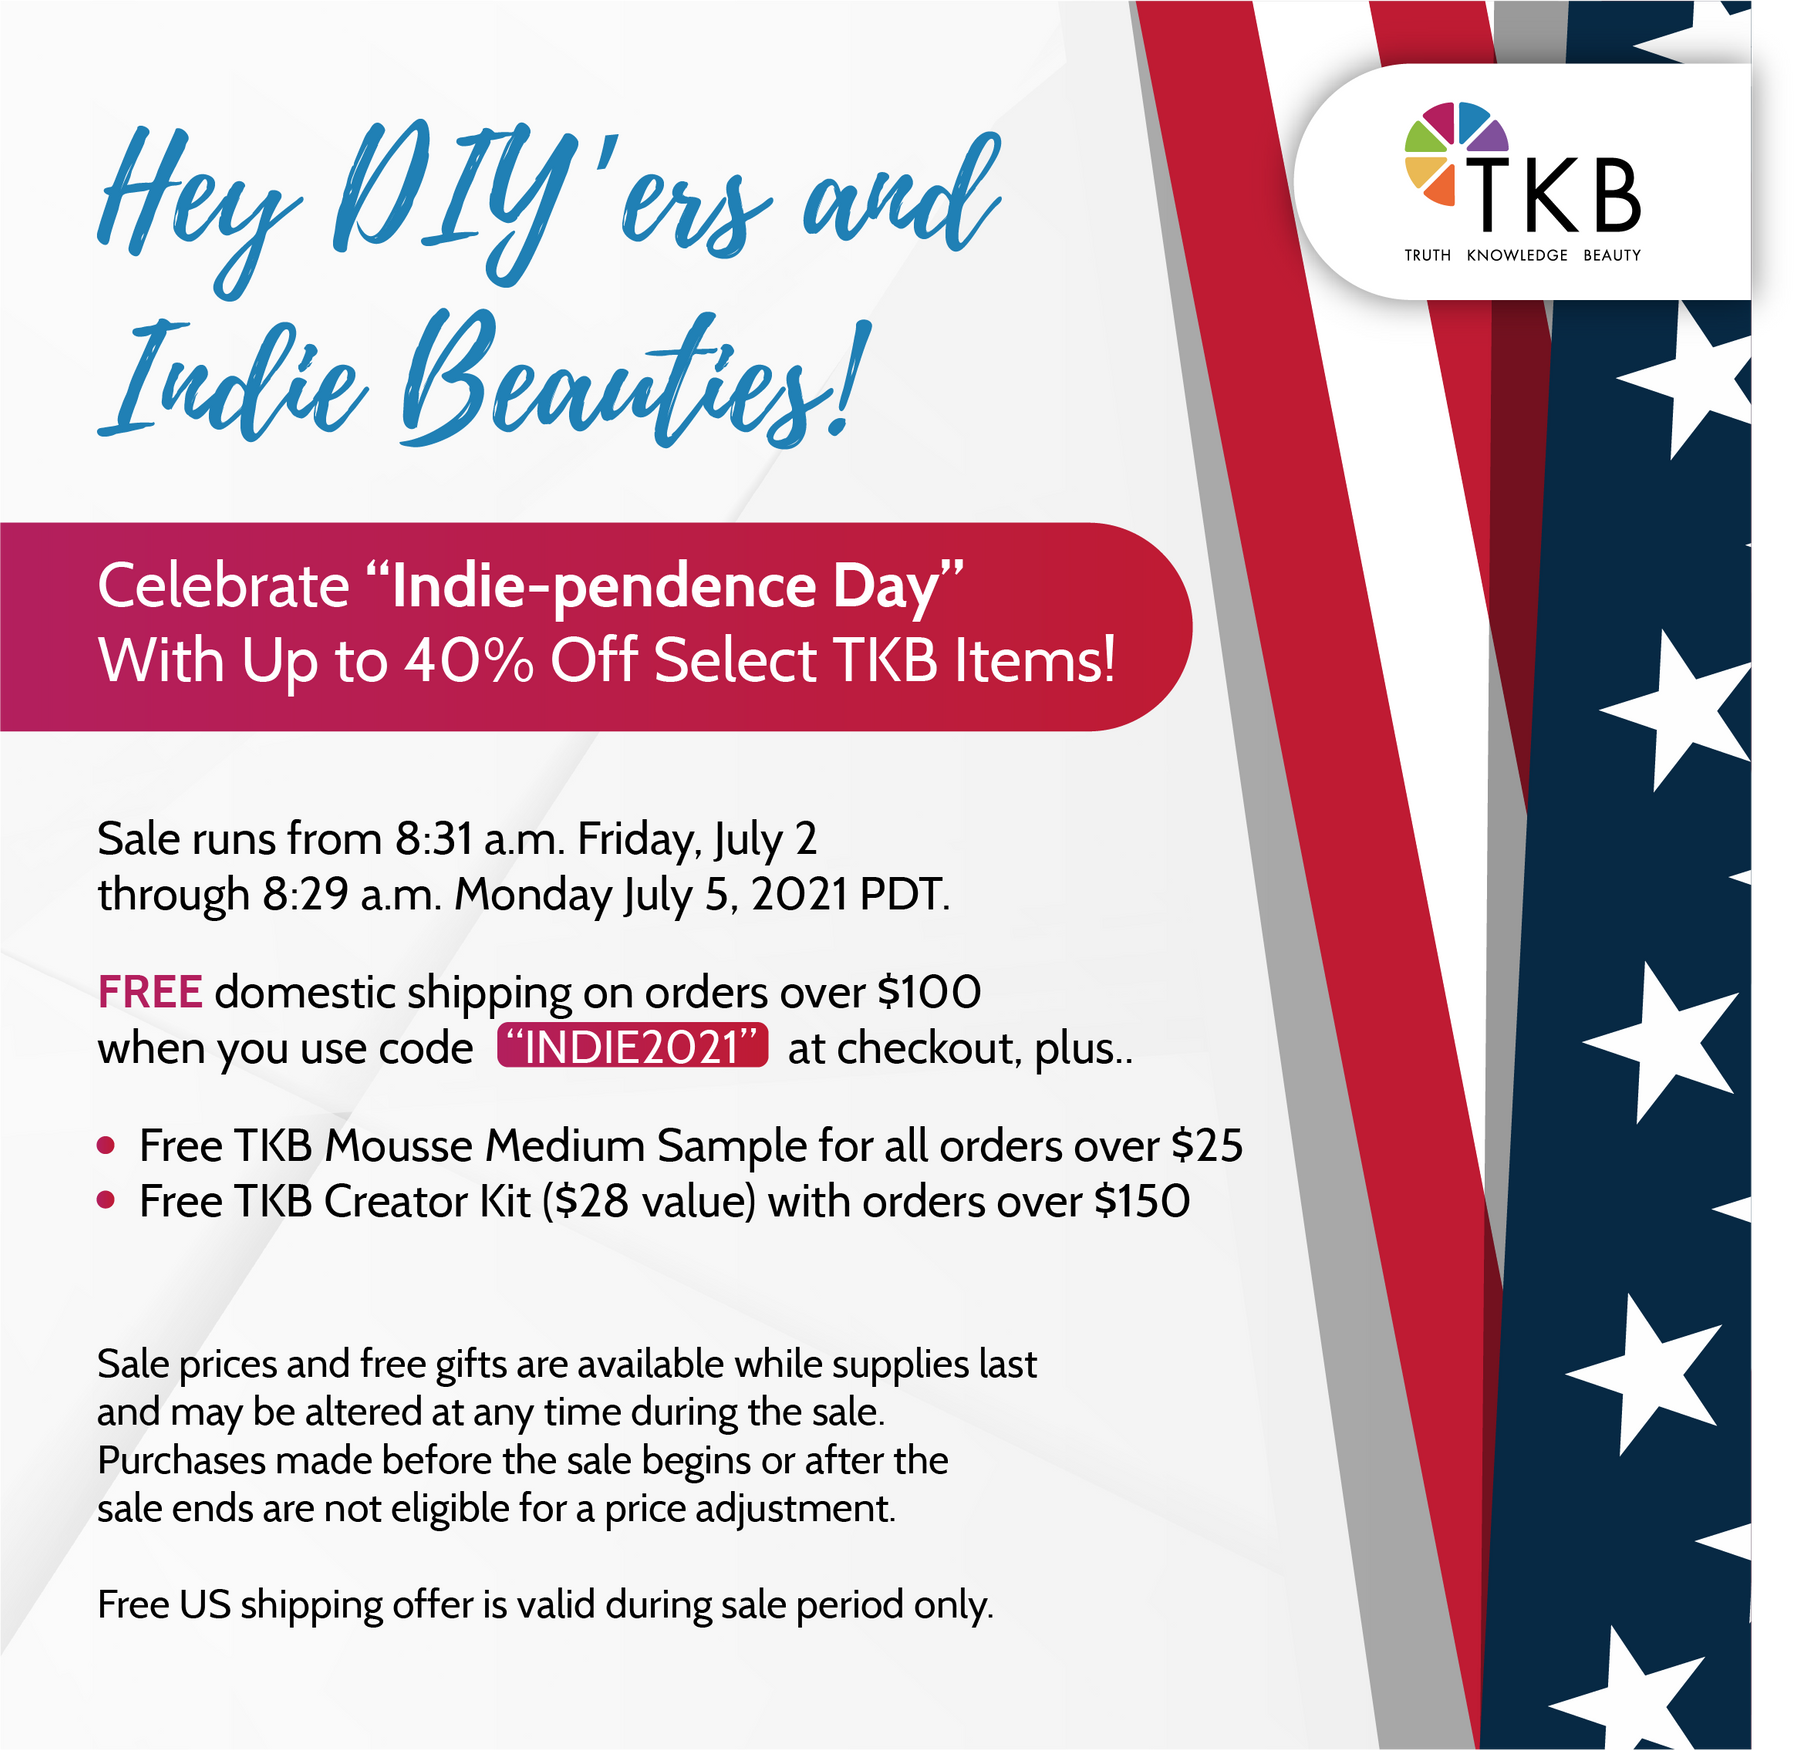 Starting July 2 - Celebrate “Indie-pendence Day” With Up to 40% Off Select TKB Items!